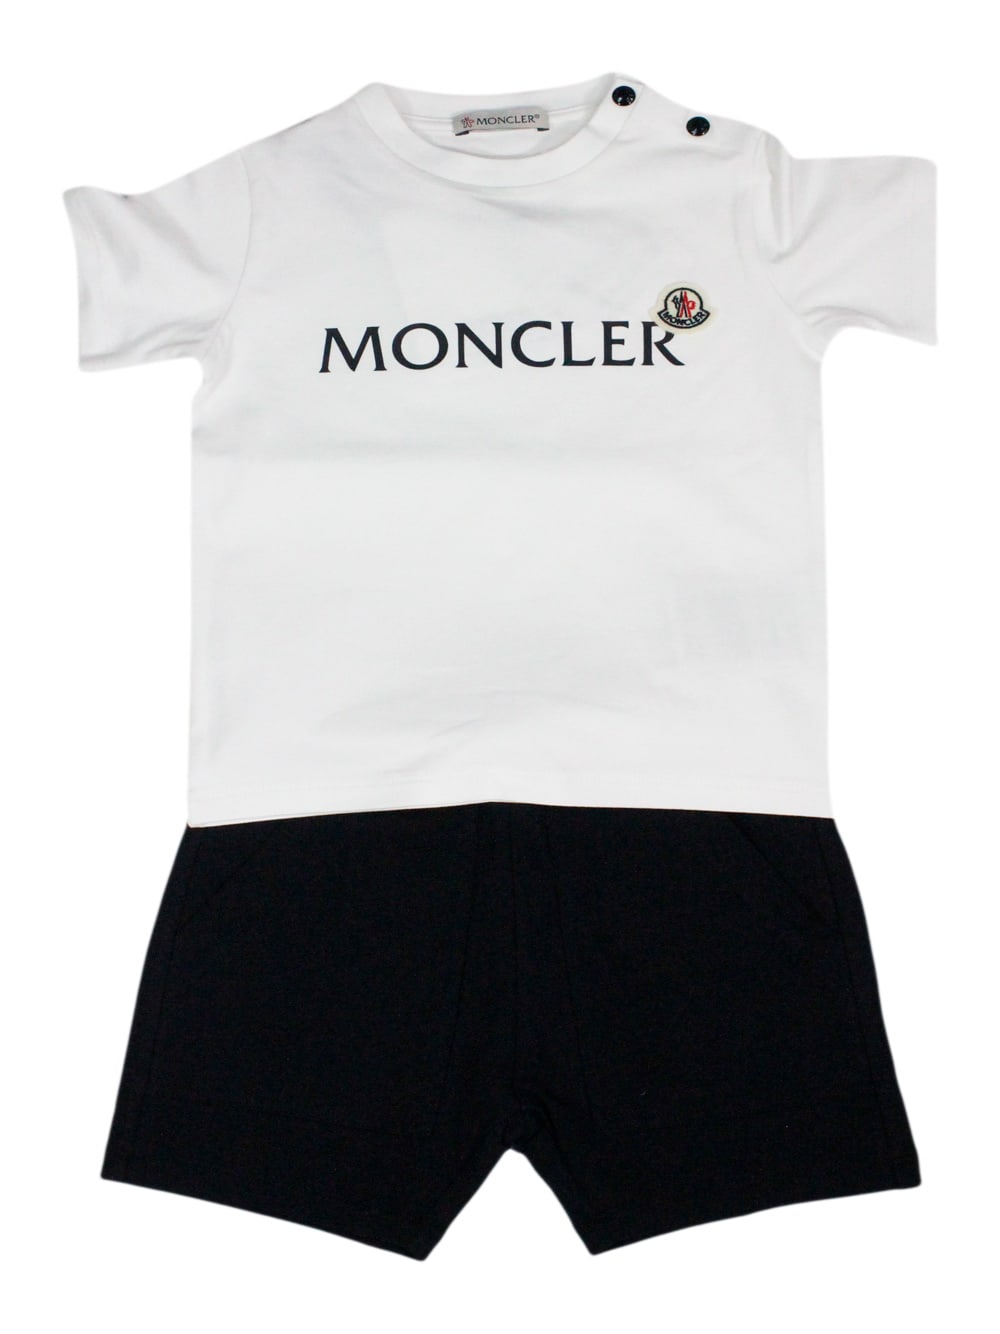 Moncler Kids' Complete With Short-sleeved Crew-neck T-shirt And Shorts With Elasticated Waist And Side Pockets. Lo In White - Blu